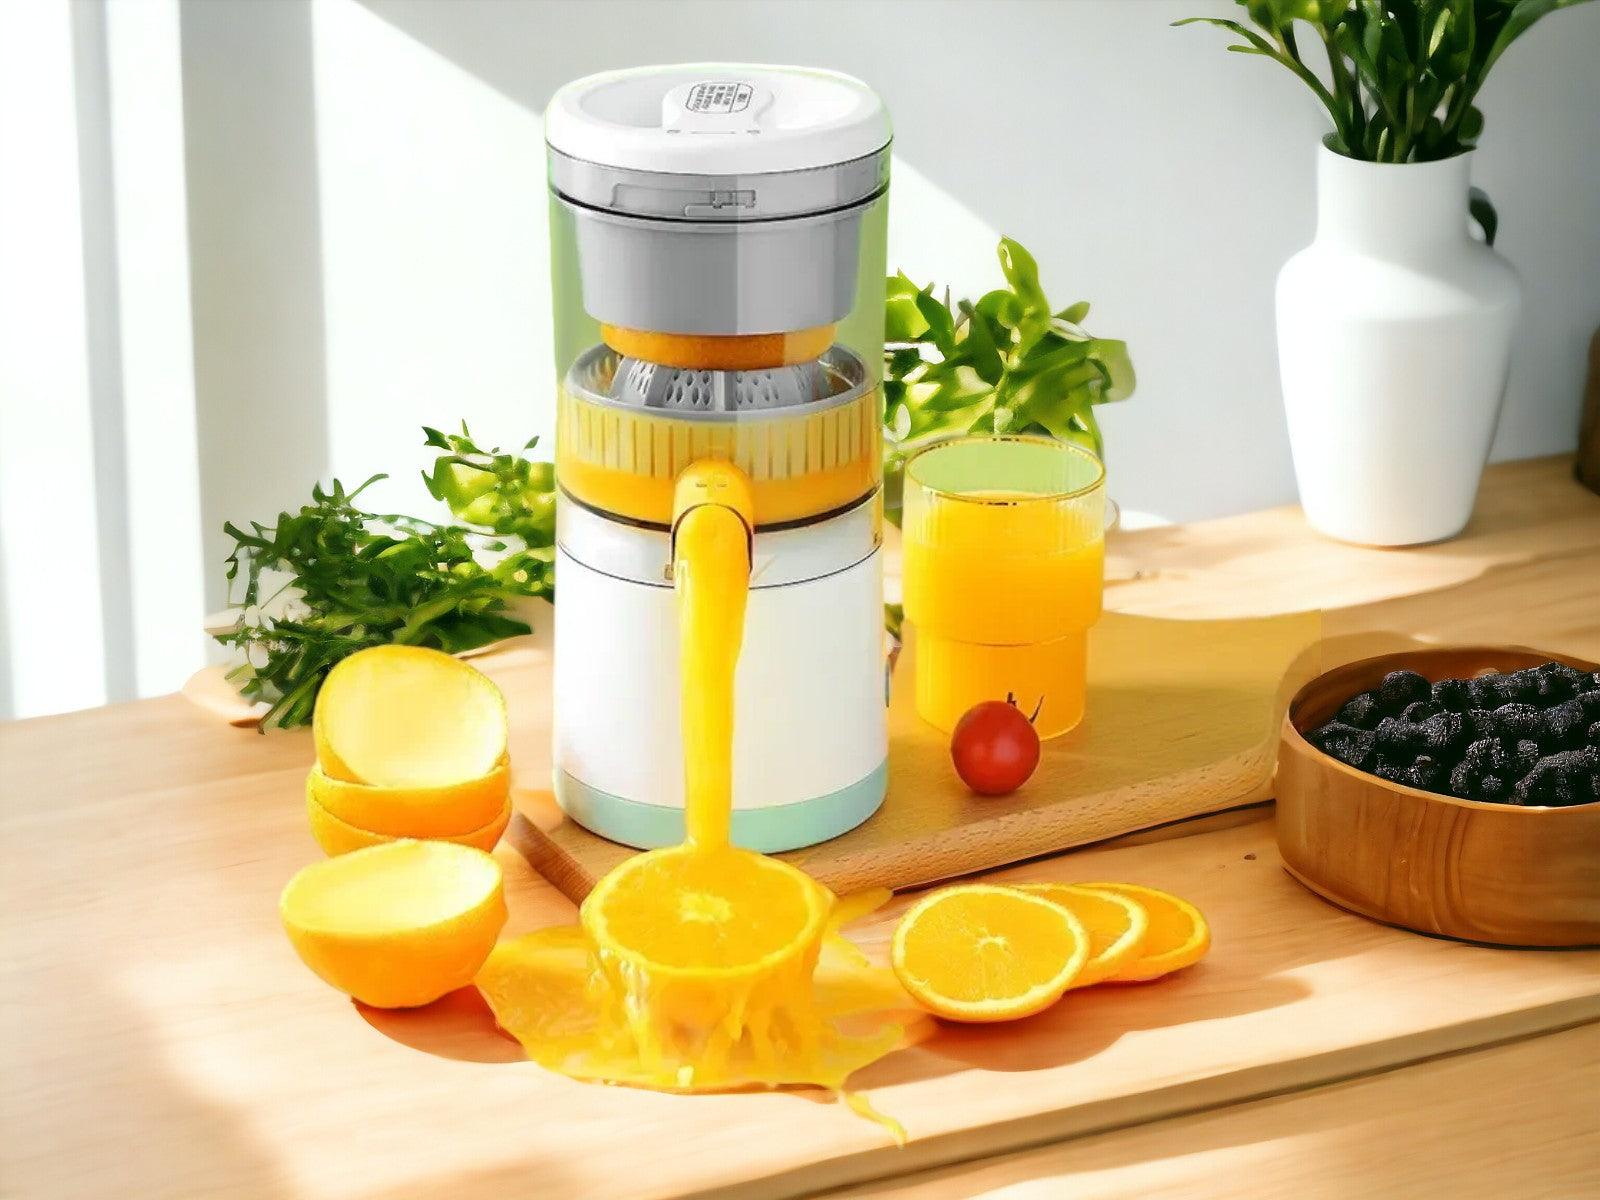 Electric-Stainless-Fruit-Juicer-Electric-Stainless-Fruit-Juicers-Orange-Squeezer-Orange-Juice-Machine-Household-Kitchen-Tools-Photoroom - JuicifyHub